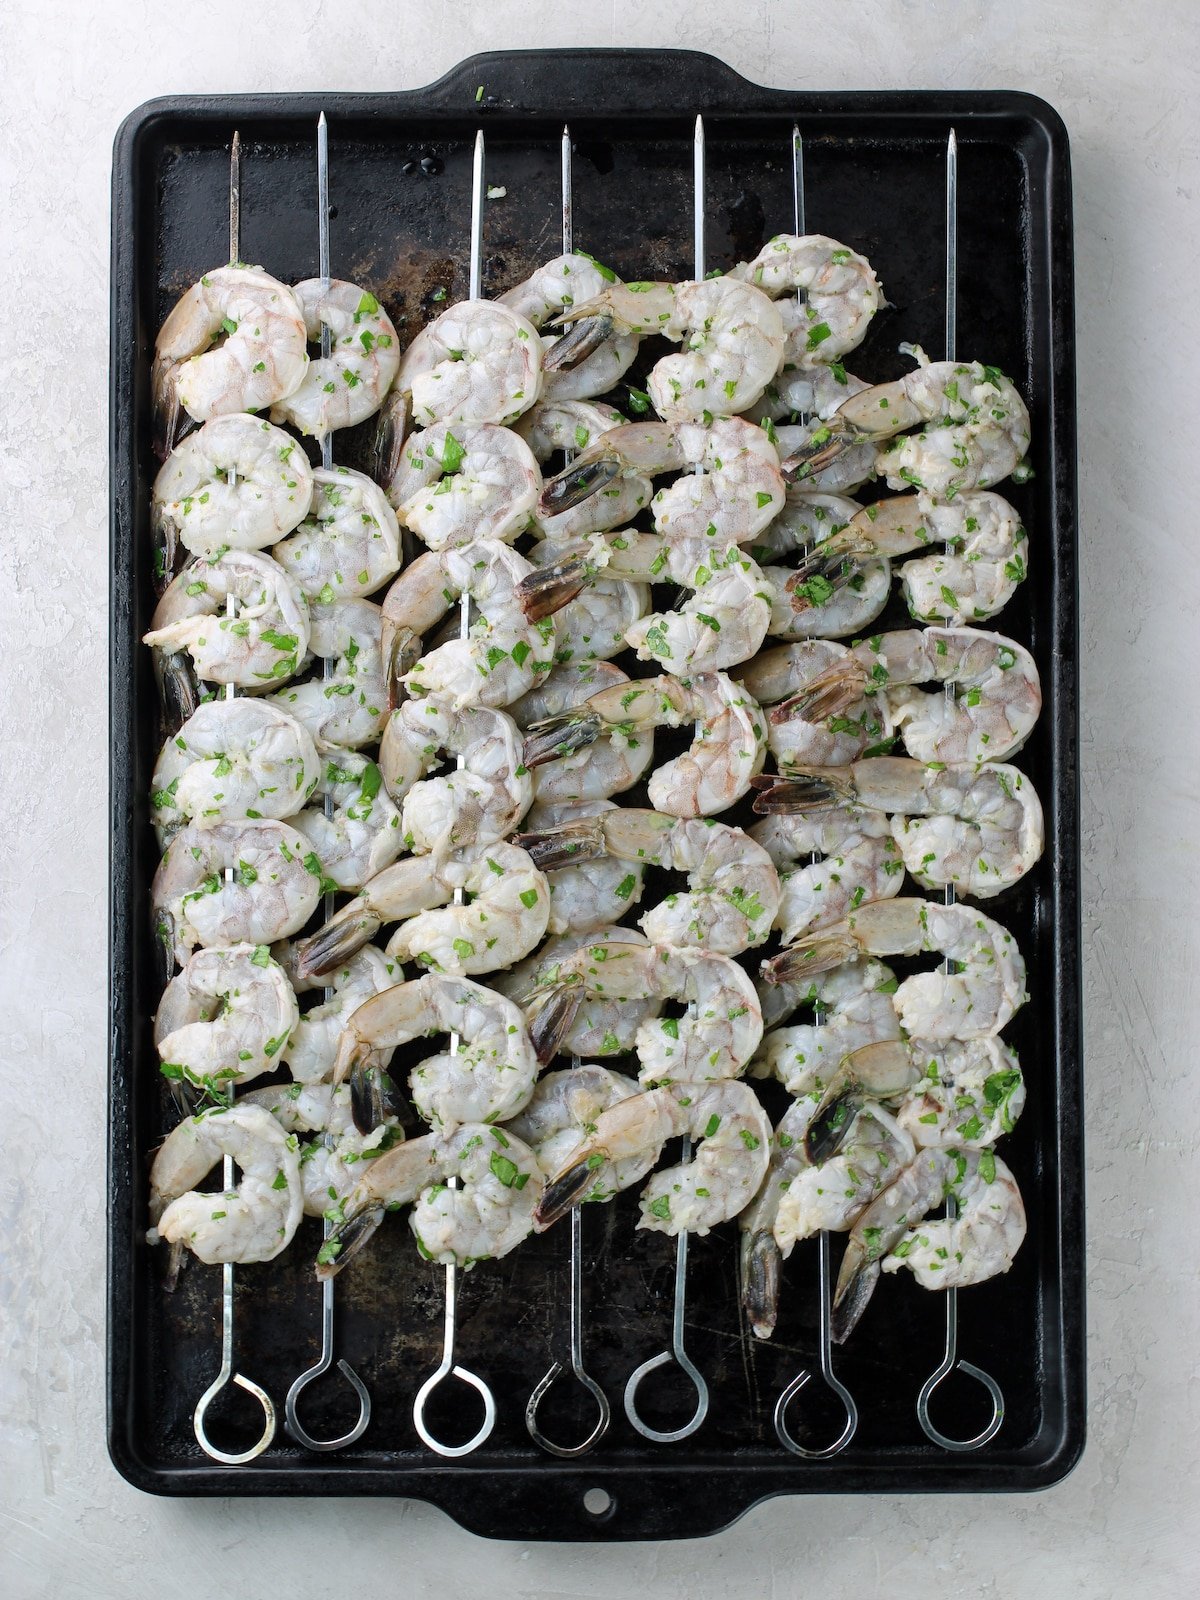 7 skewers of shrimp on a baking sheet ready to grill.